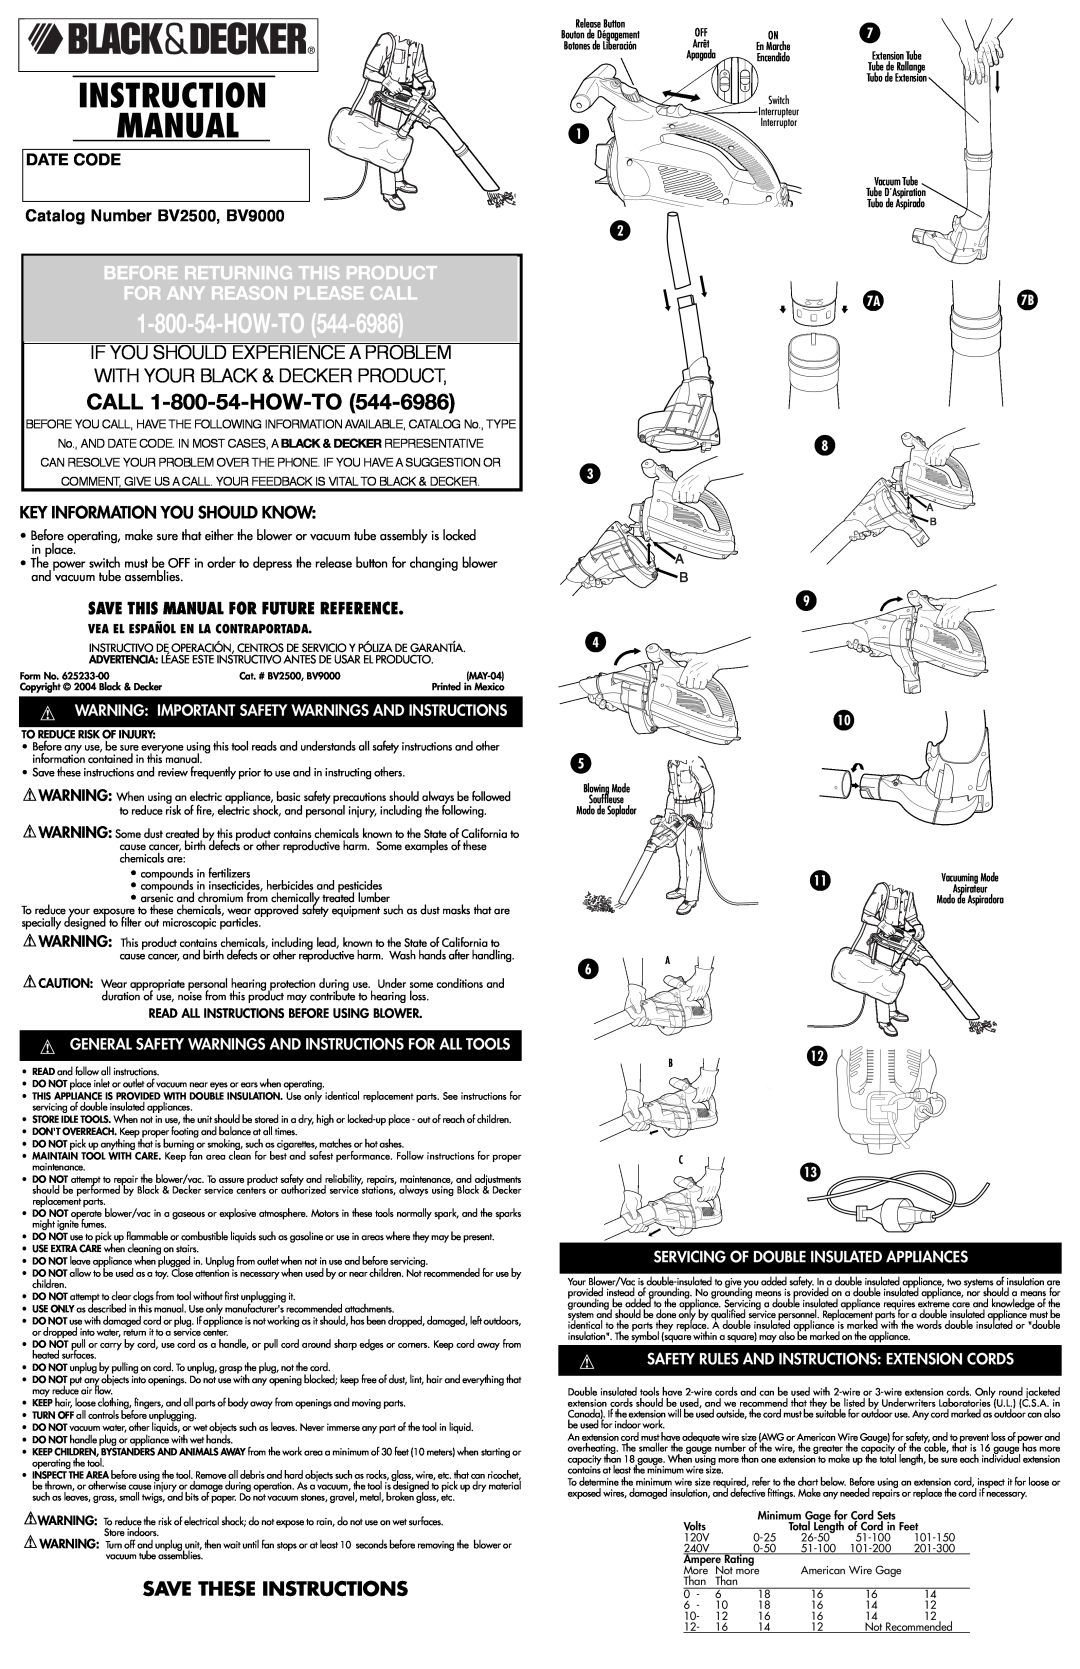 Black & Decker 625233-00 instruction manual Key Information You Should Know, How-To, CALL 1-800-54-HOW-TO, Date Code, 7A7B 